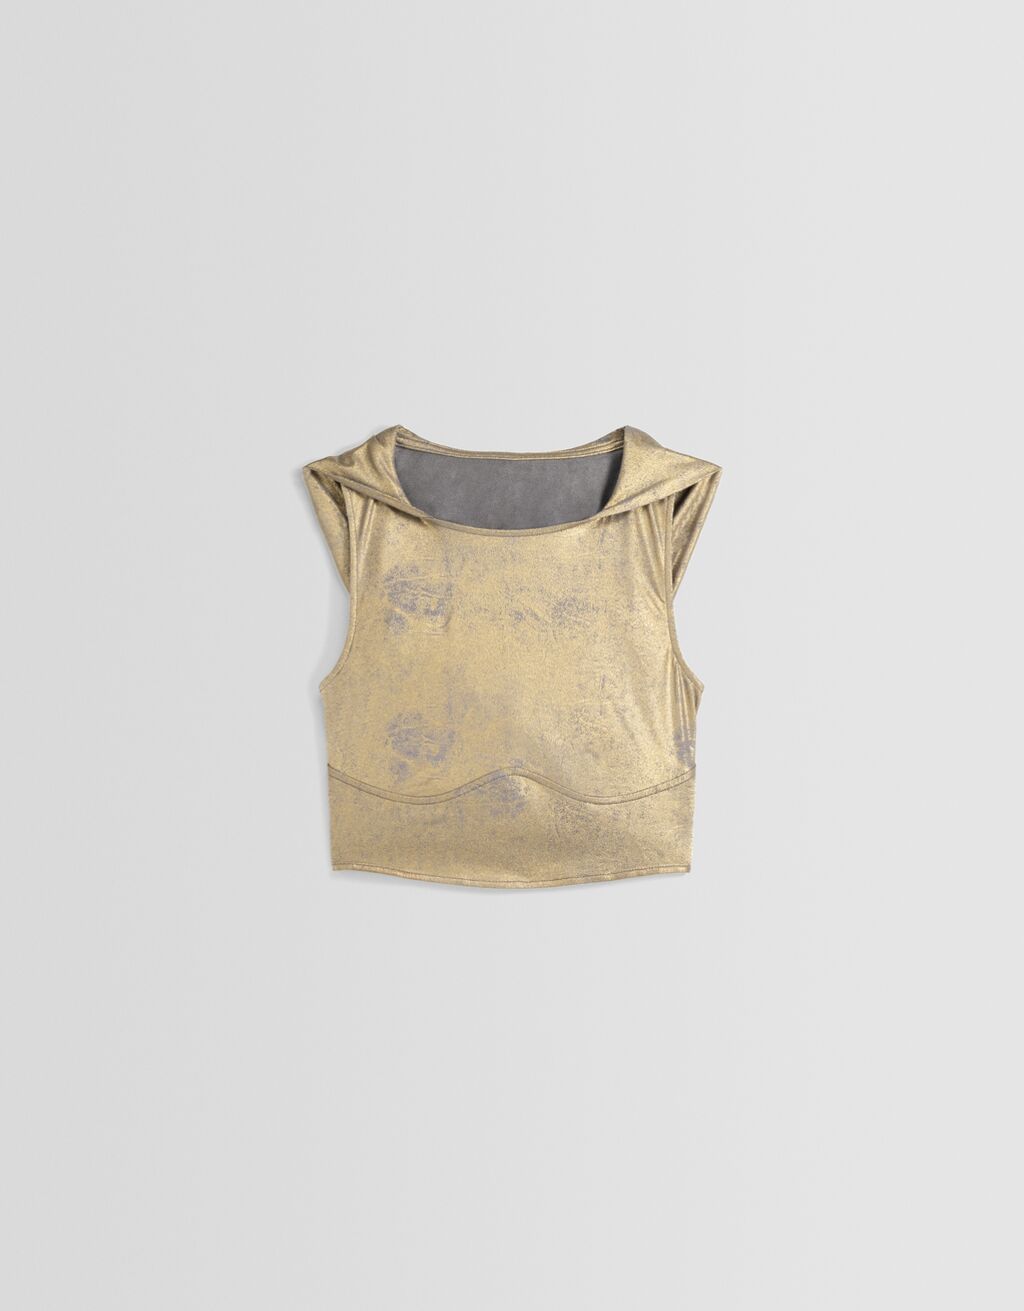 Sleeveless metallic T-shirt with a hood and open back